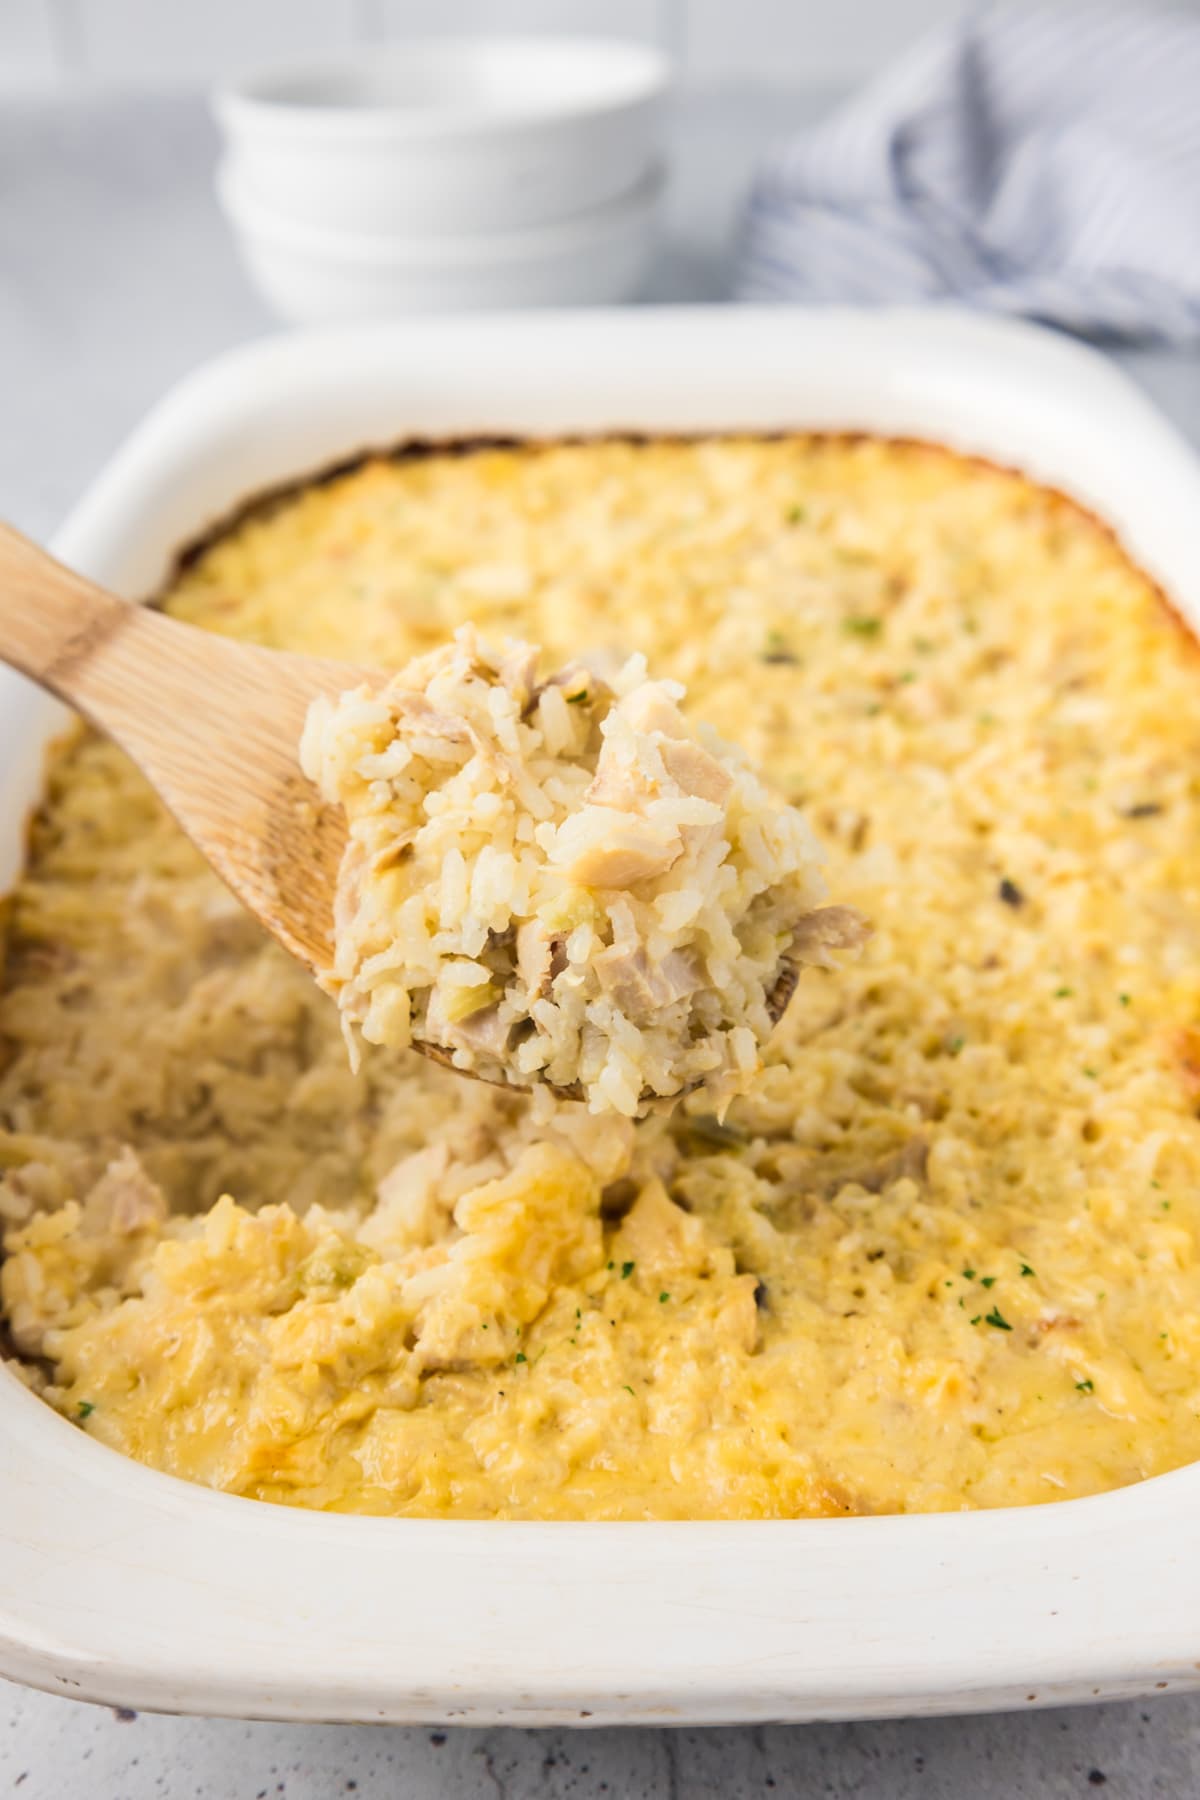 chicken and rice casserole in white baking dish with wooden spoon